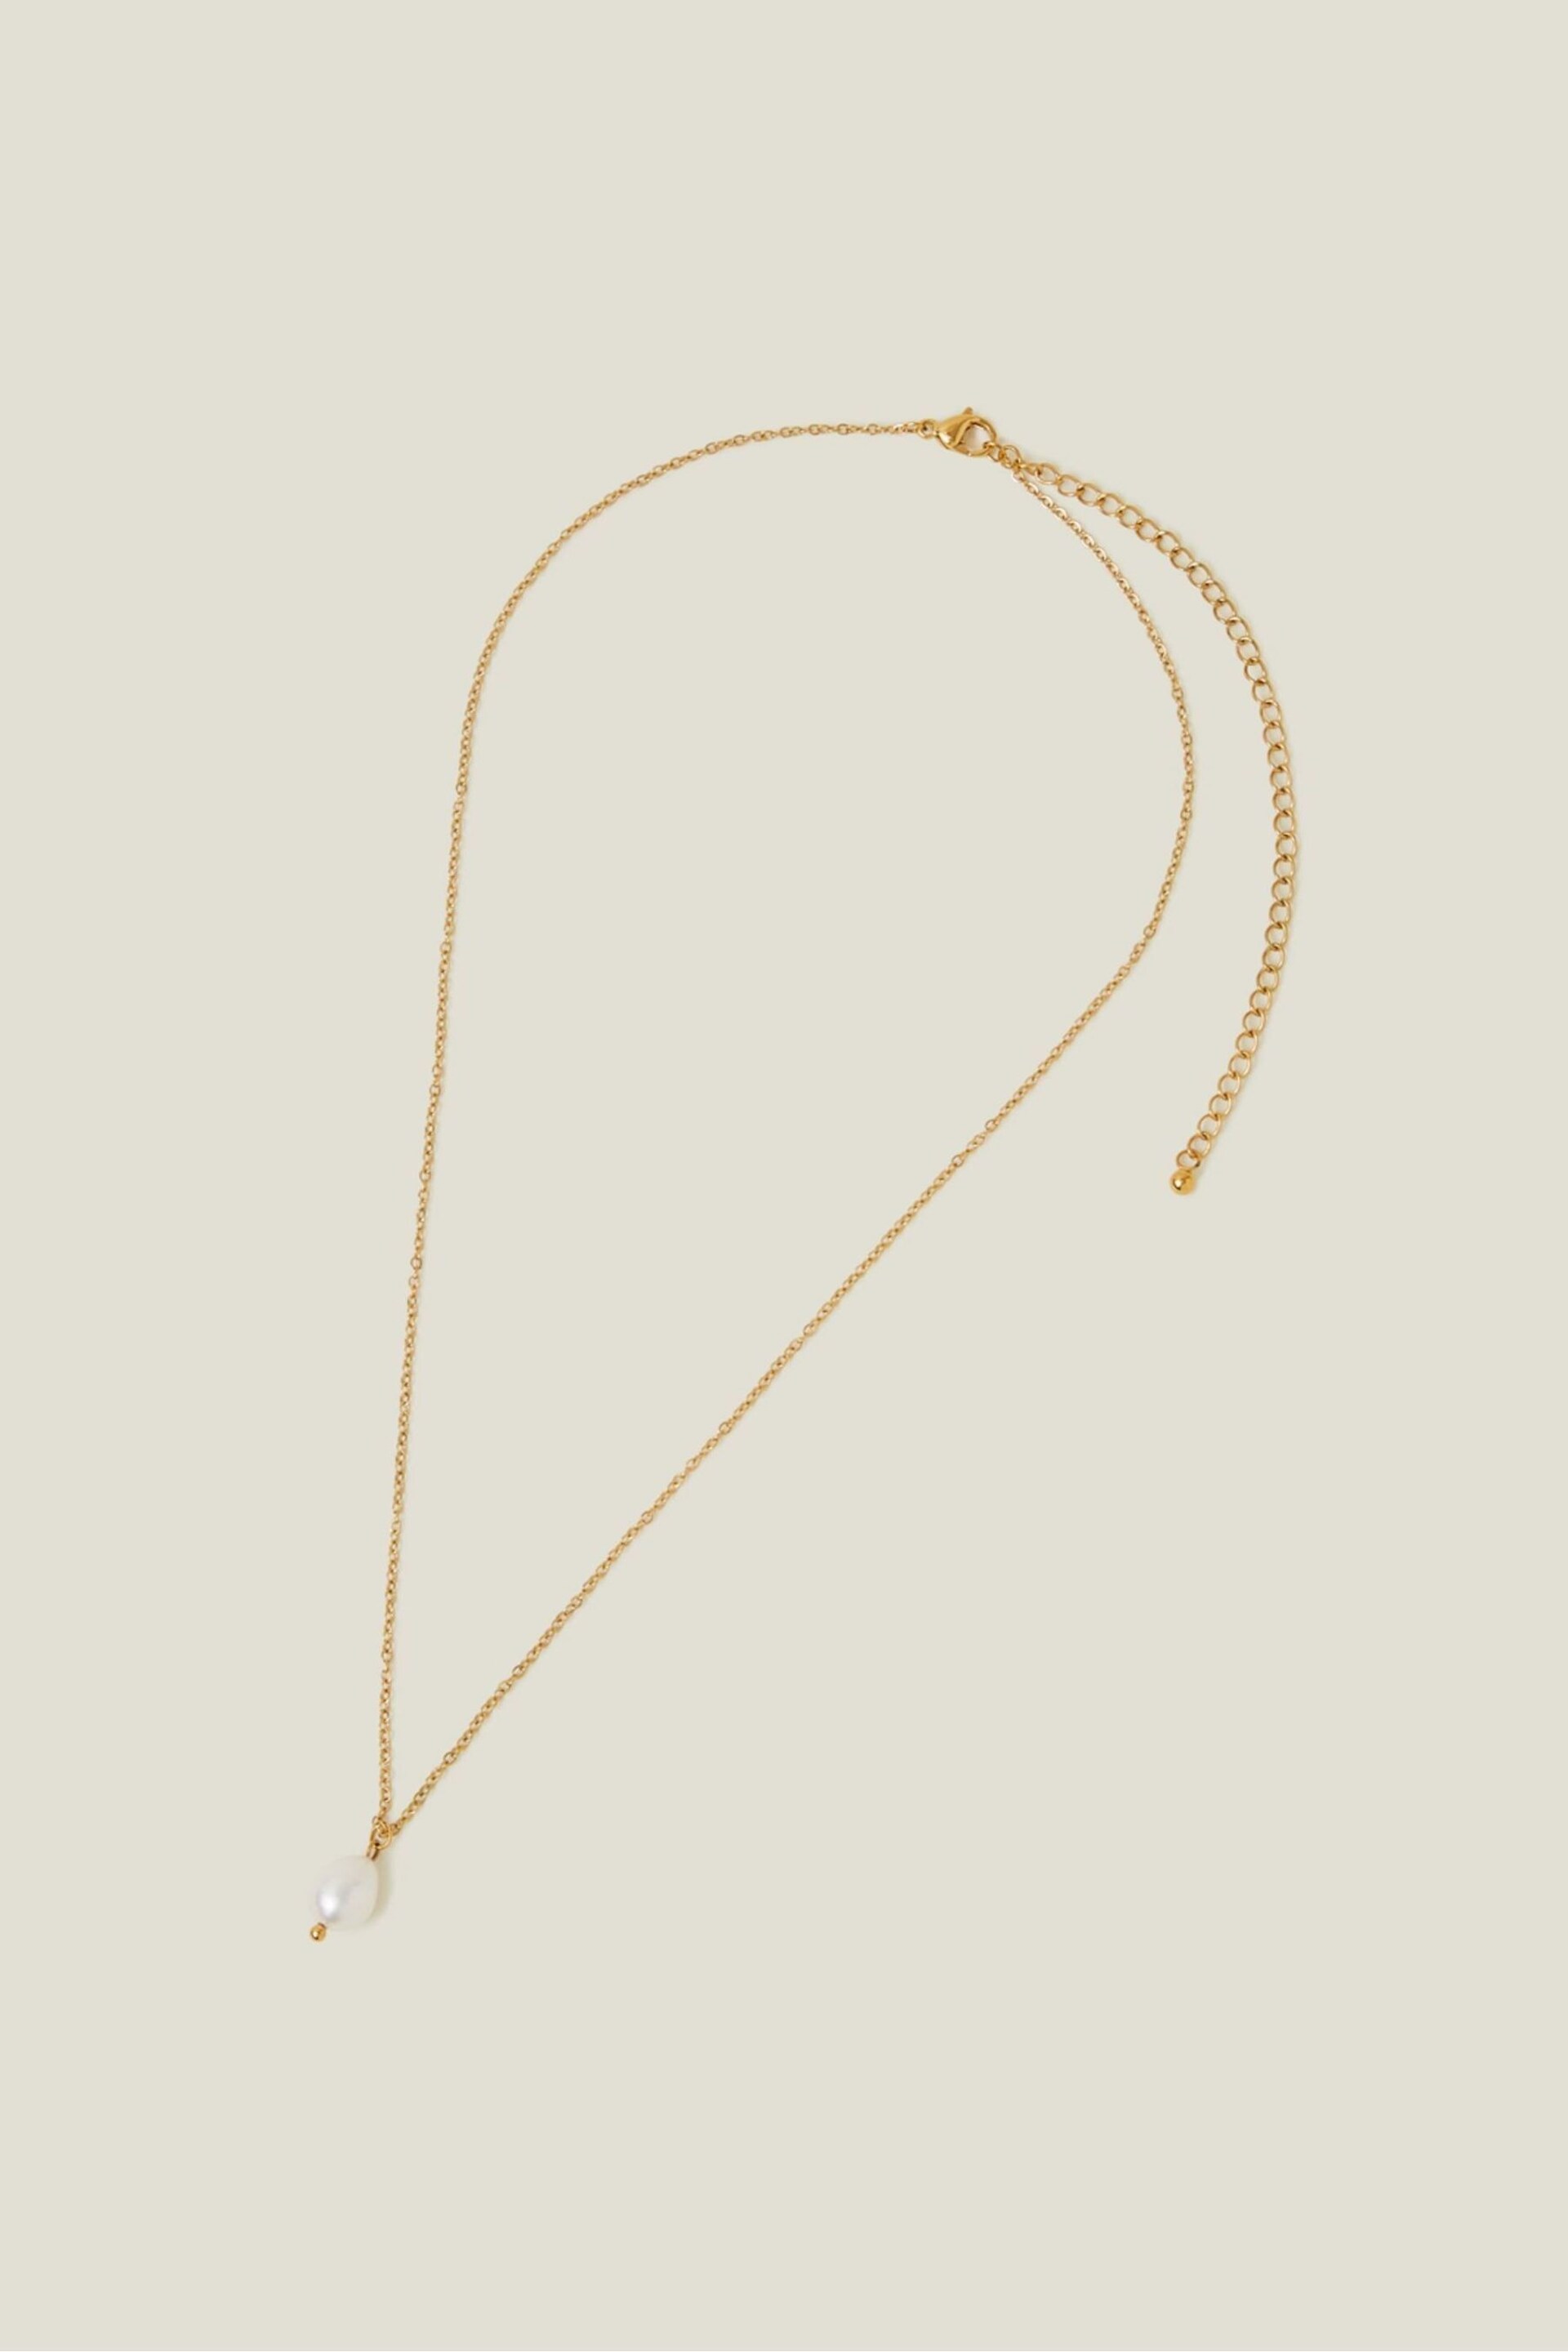 Accessorize Gold Tone Stainless Steel Pearl Pendant Necklace - Image 2 of 2